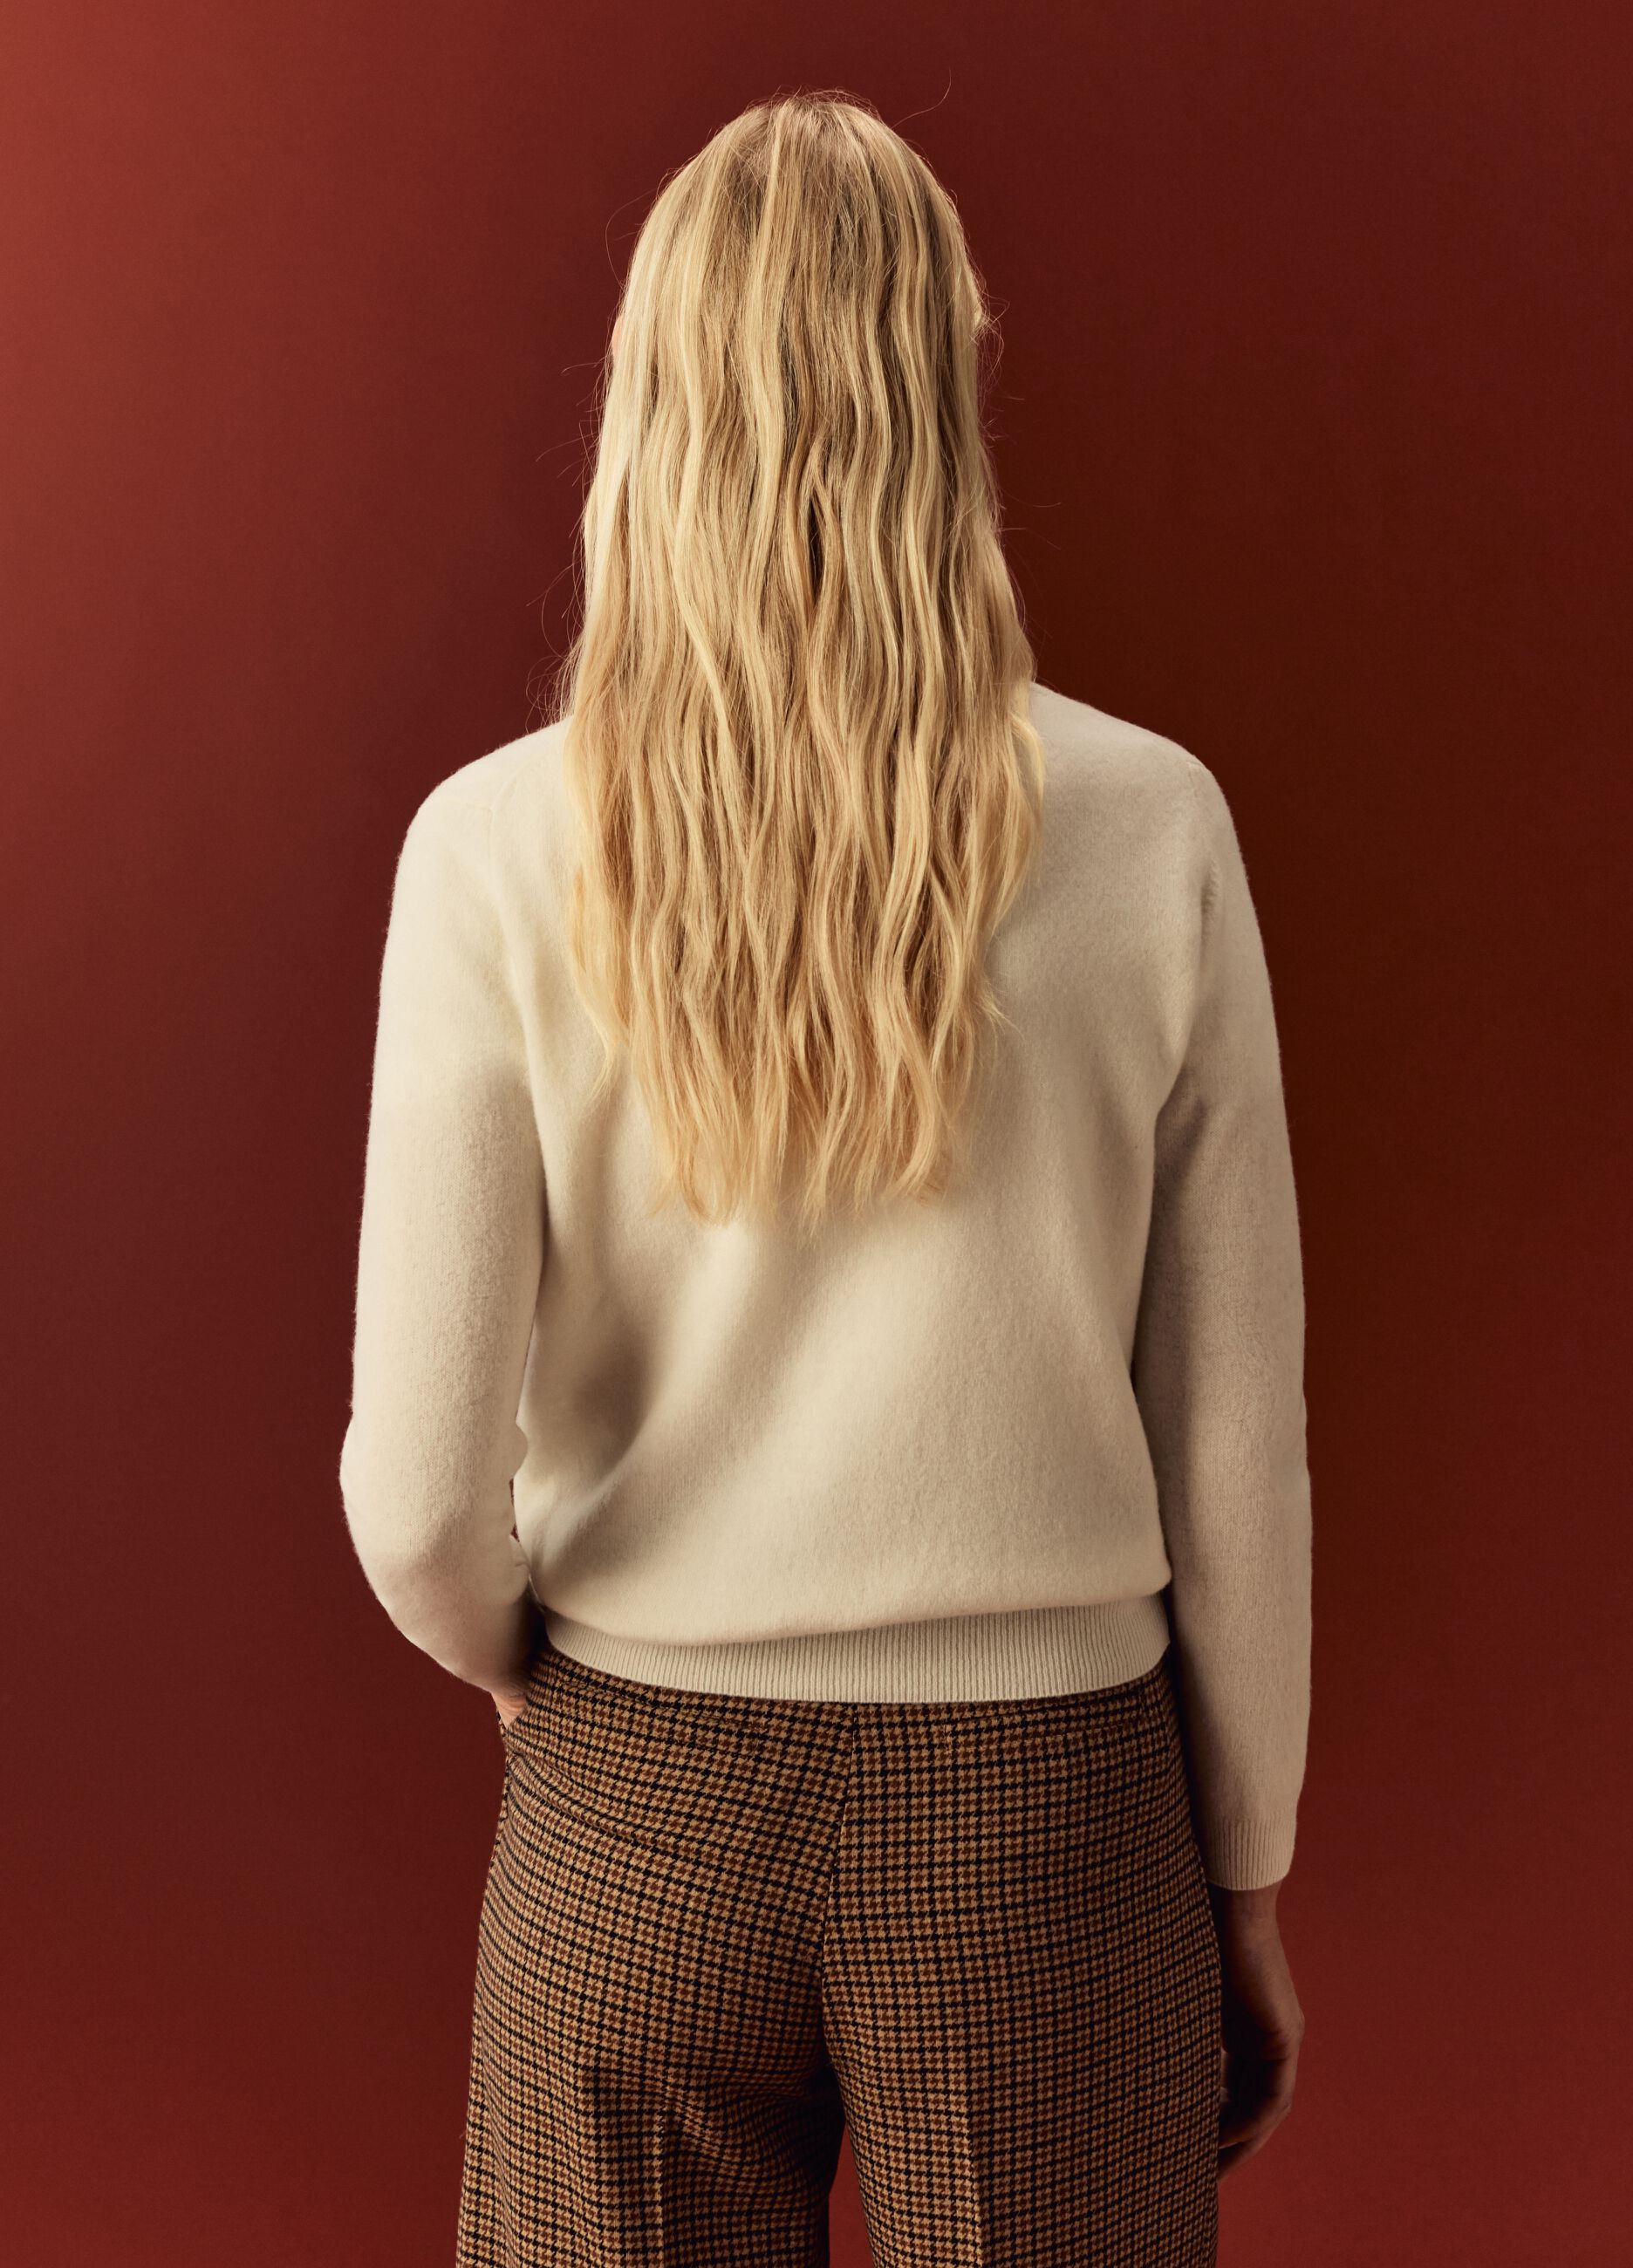 Wool and cashmere pullover